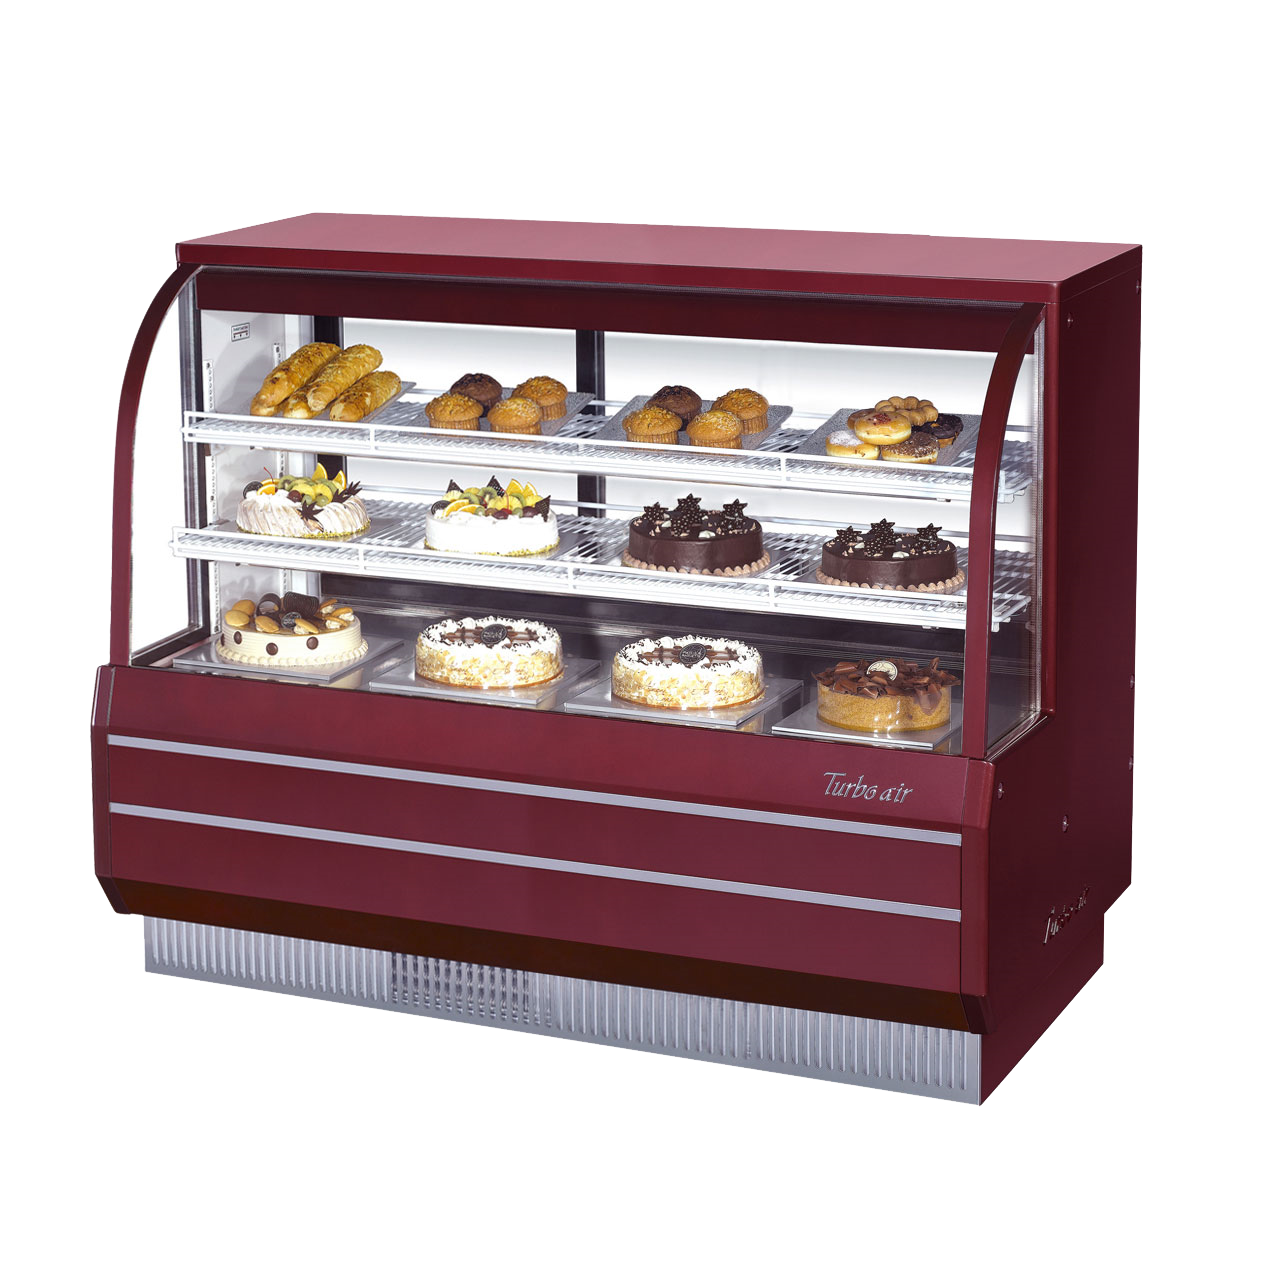 superior-equipment-supply - Turbo Air - Turbo Air 60.5" Wide Stainless Steel Refrigerated Bakery Case